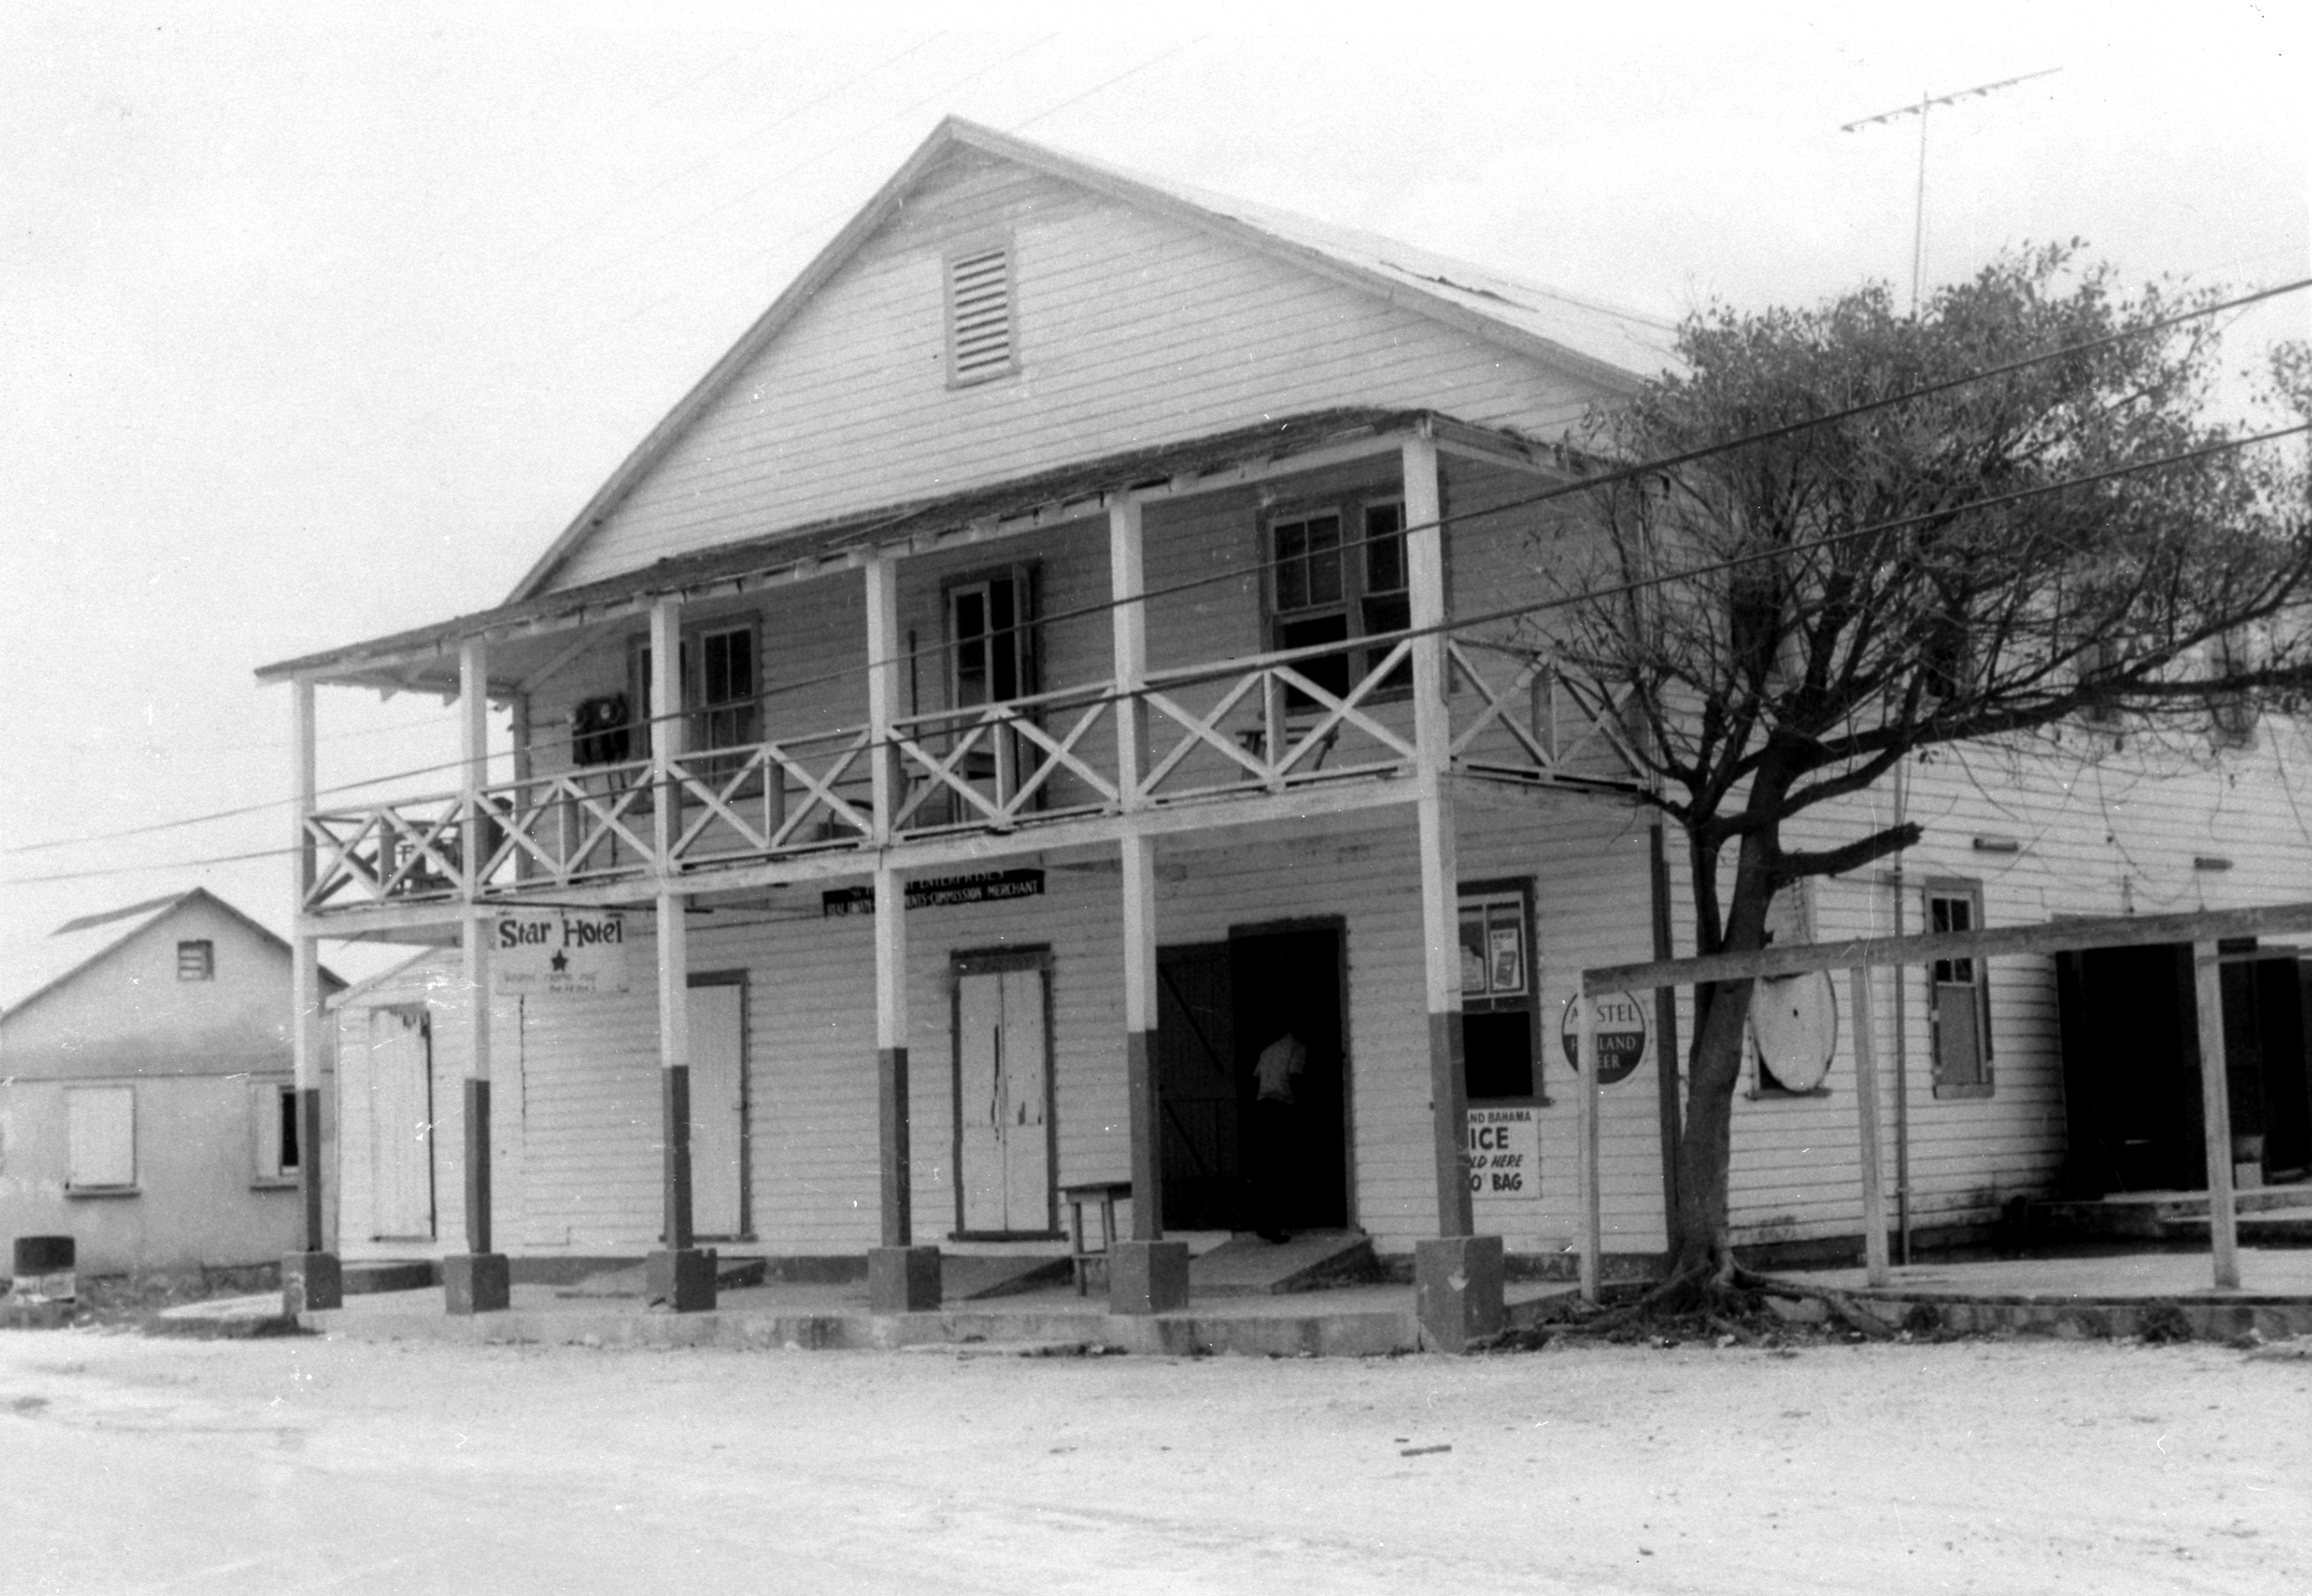 The Star Hotel, West End, 1967